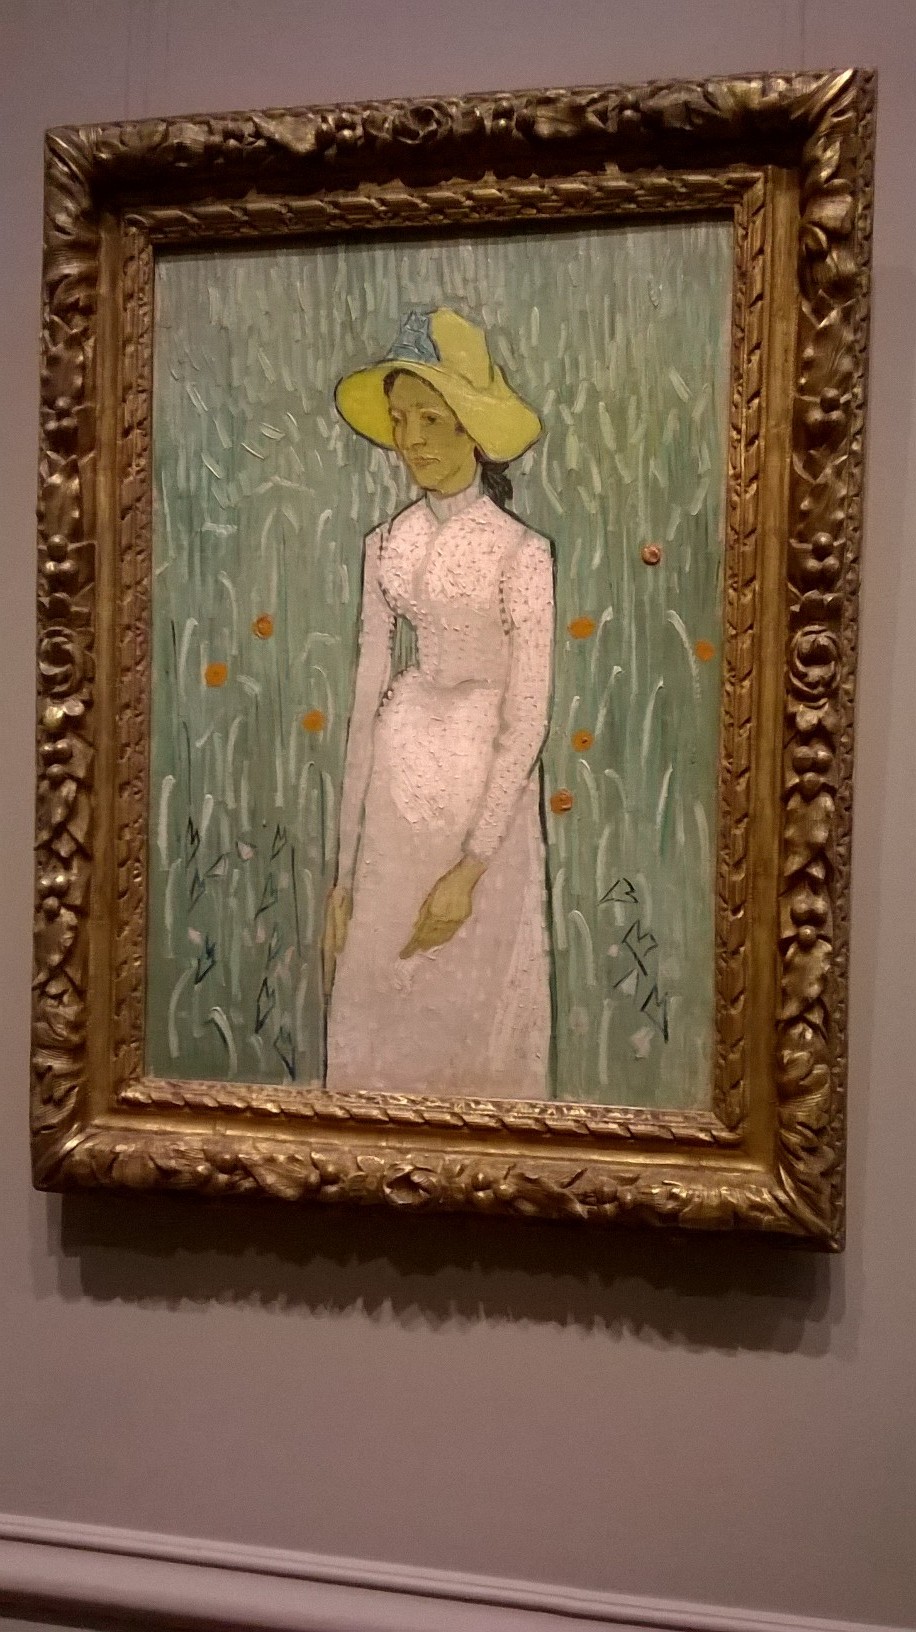 I got to see Van Gogh at the National Gallery of Art today and it means everything